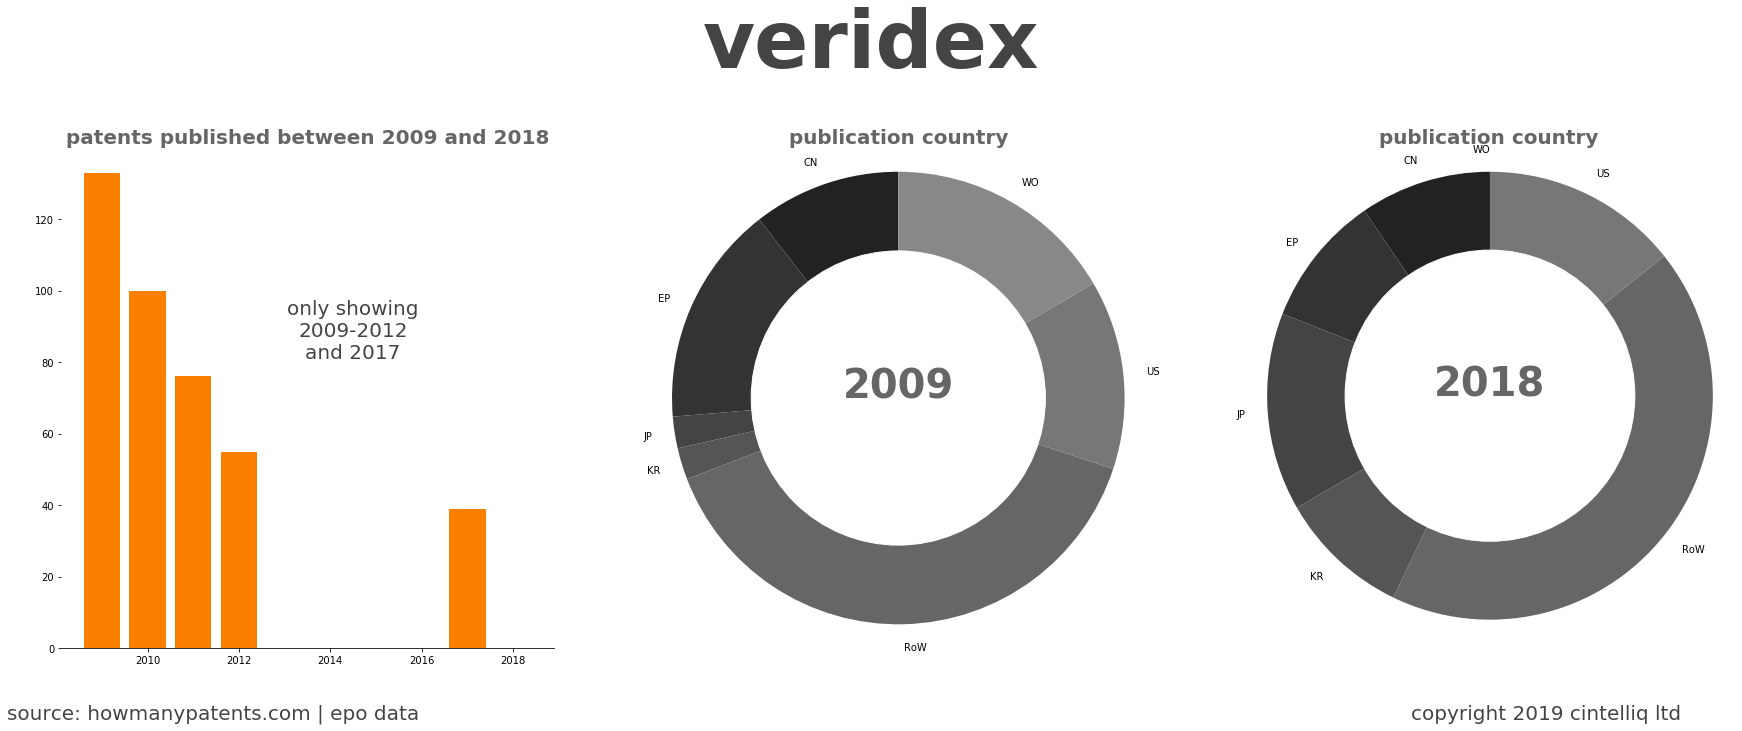 summary of patents for Veridex